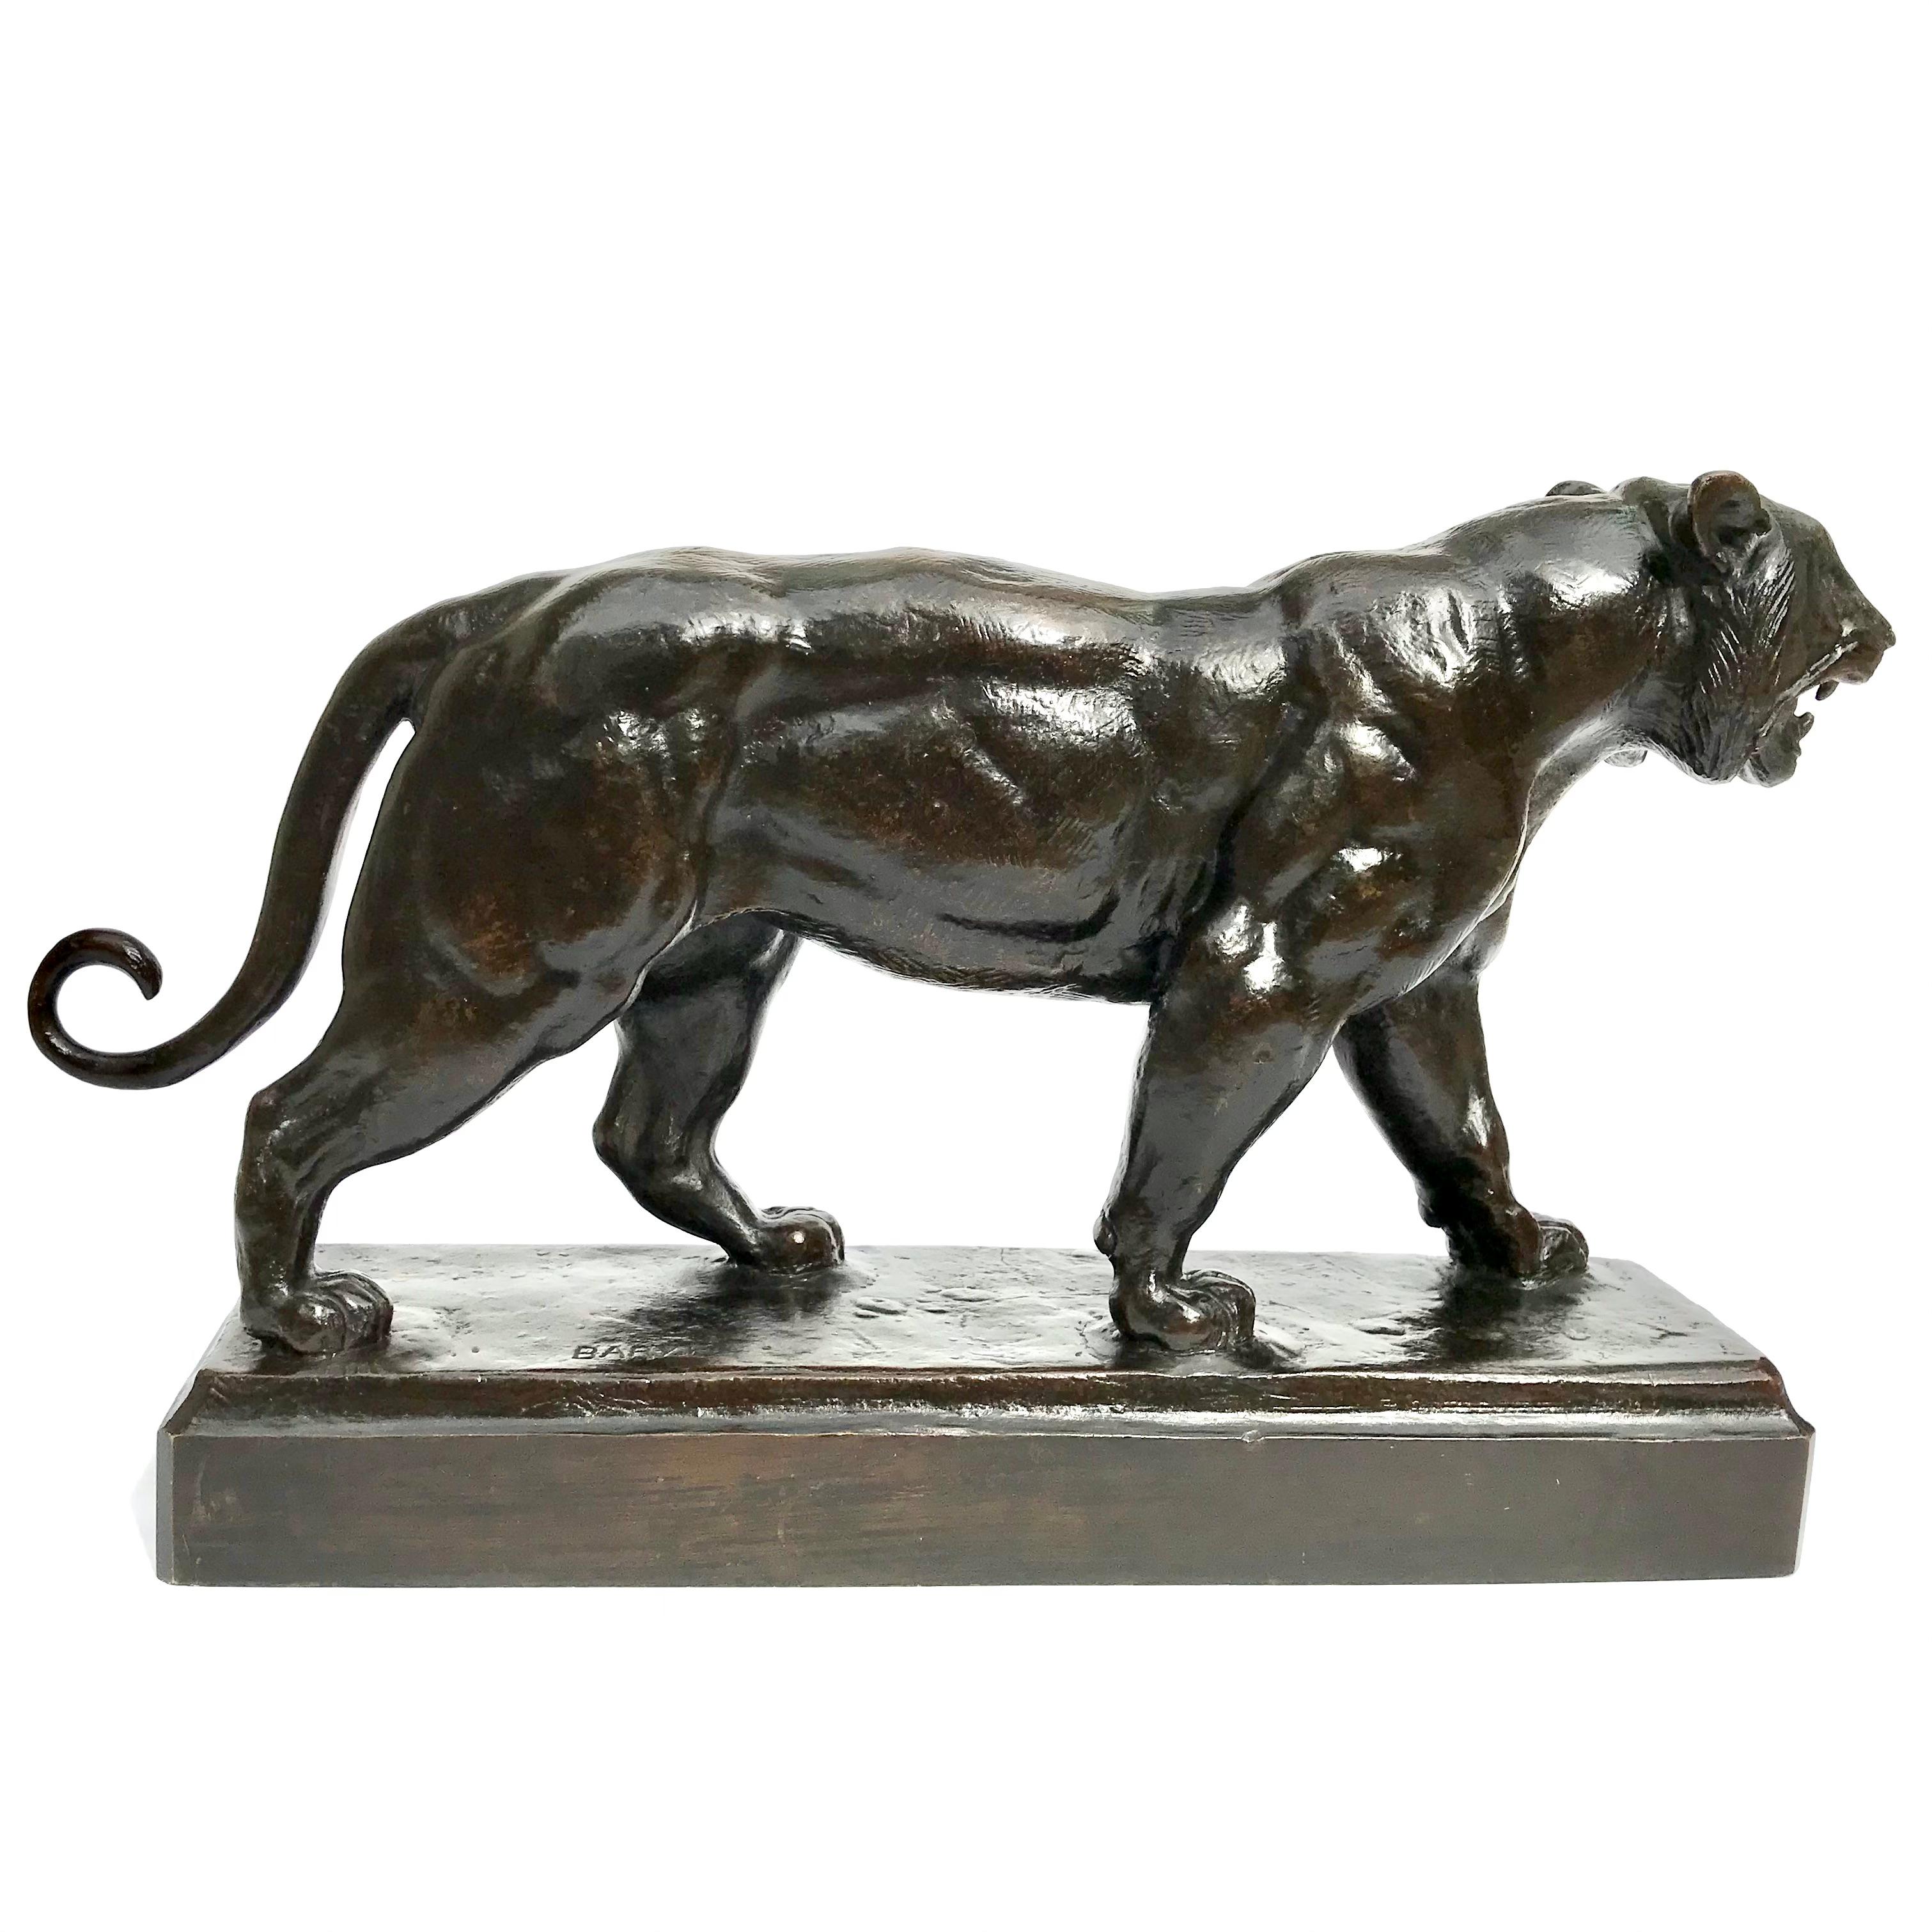 Antoine-Louis Barye (French 1799 - 1875) 
tigre marchant (walking tiger)
signed: BARYE Circa 1876
bronze, dark brown patina
Dimensions: 17 Inches long x 9.75 Inches high x 4 Inches deep.

This older bronze cast by Brame right after Barye’s death is